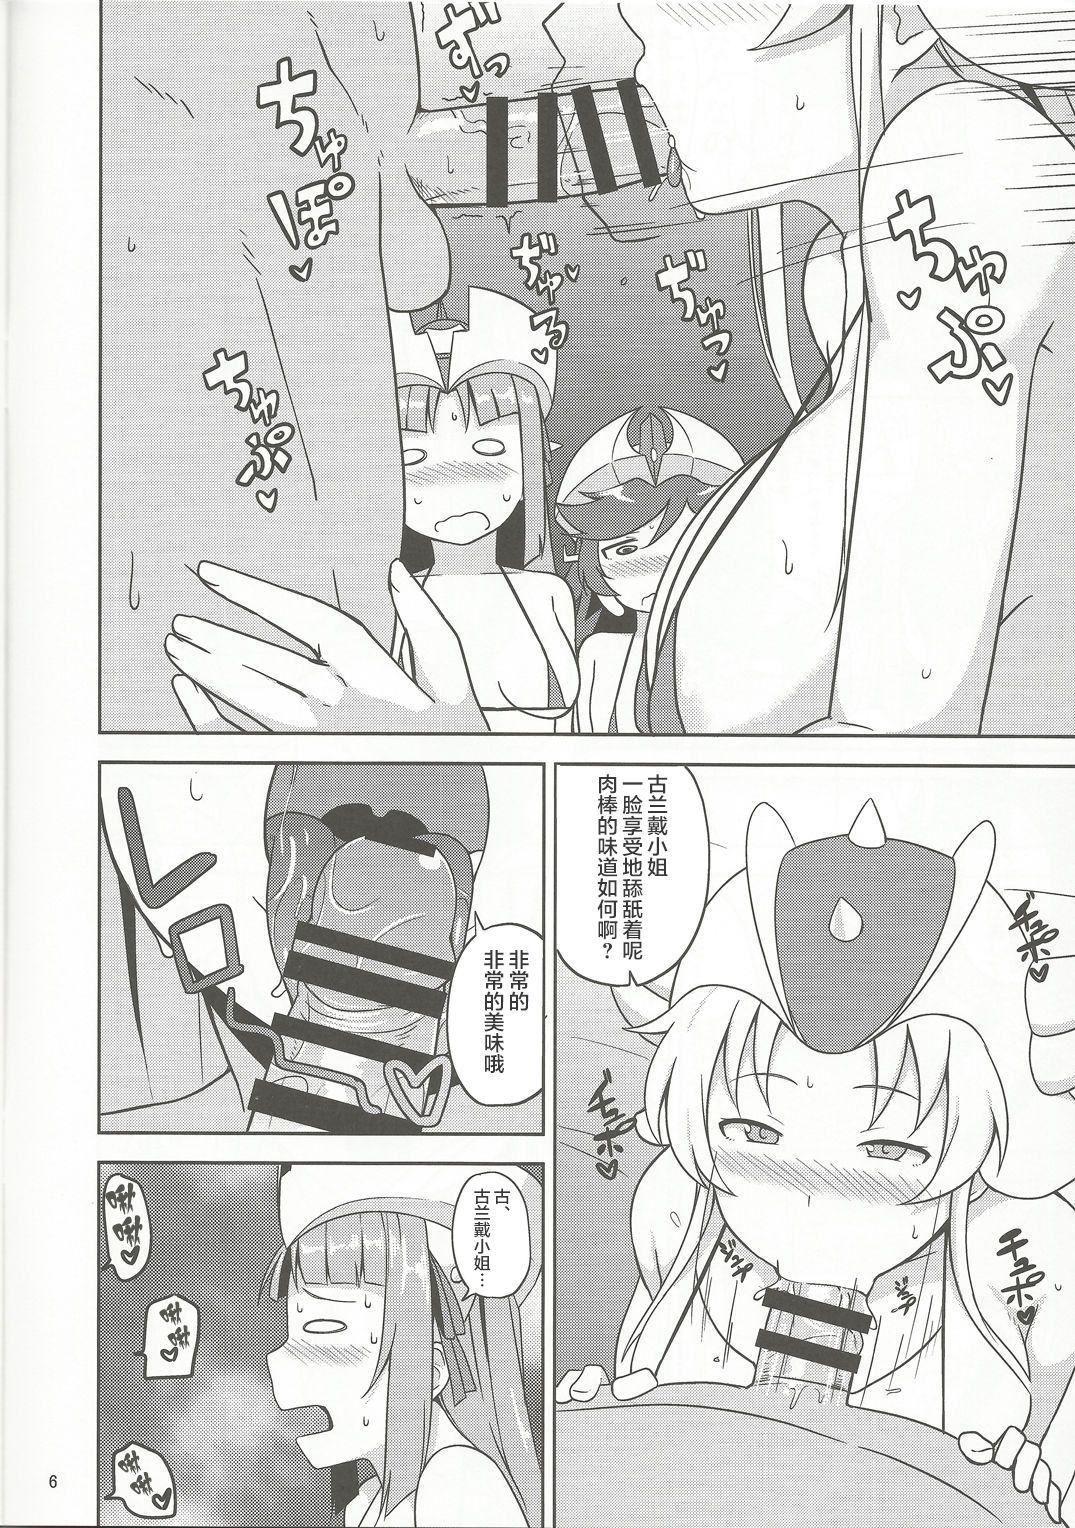 Slapping RGH - Robot girls z Eating Pussy - Page 5